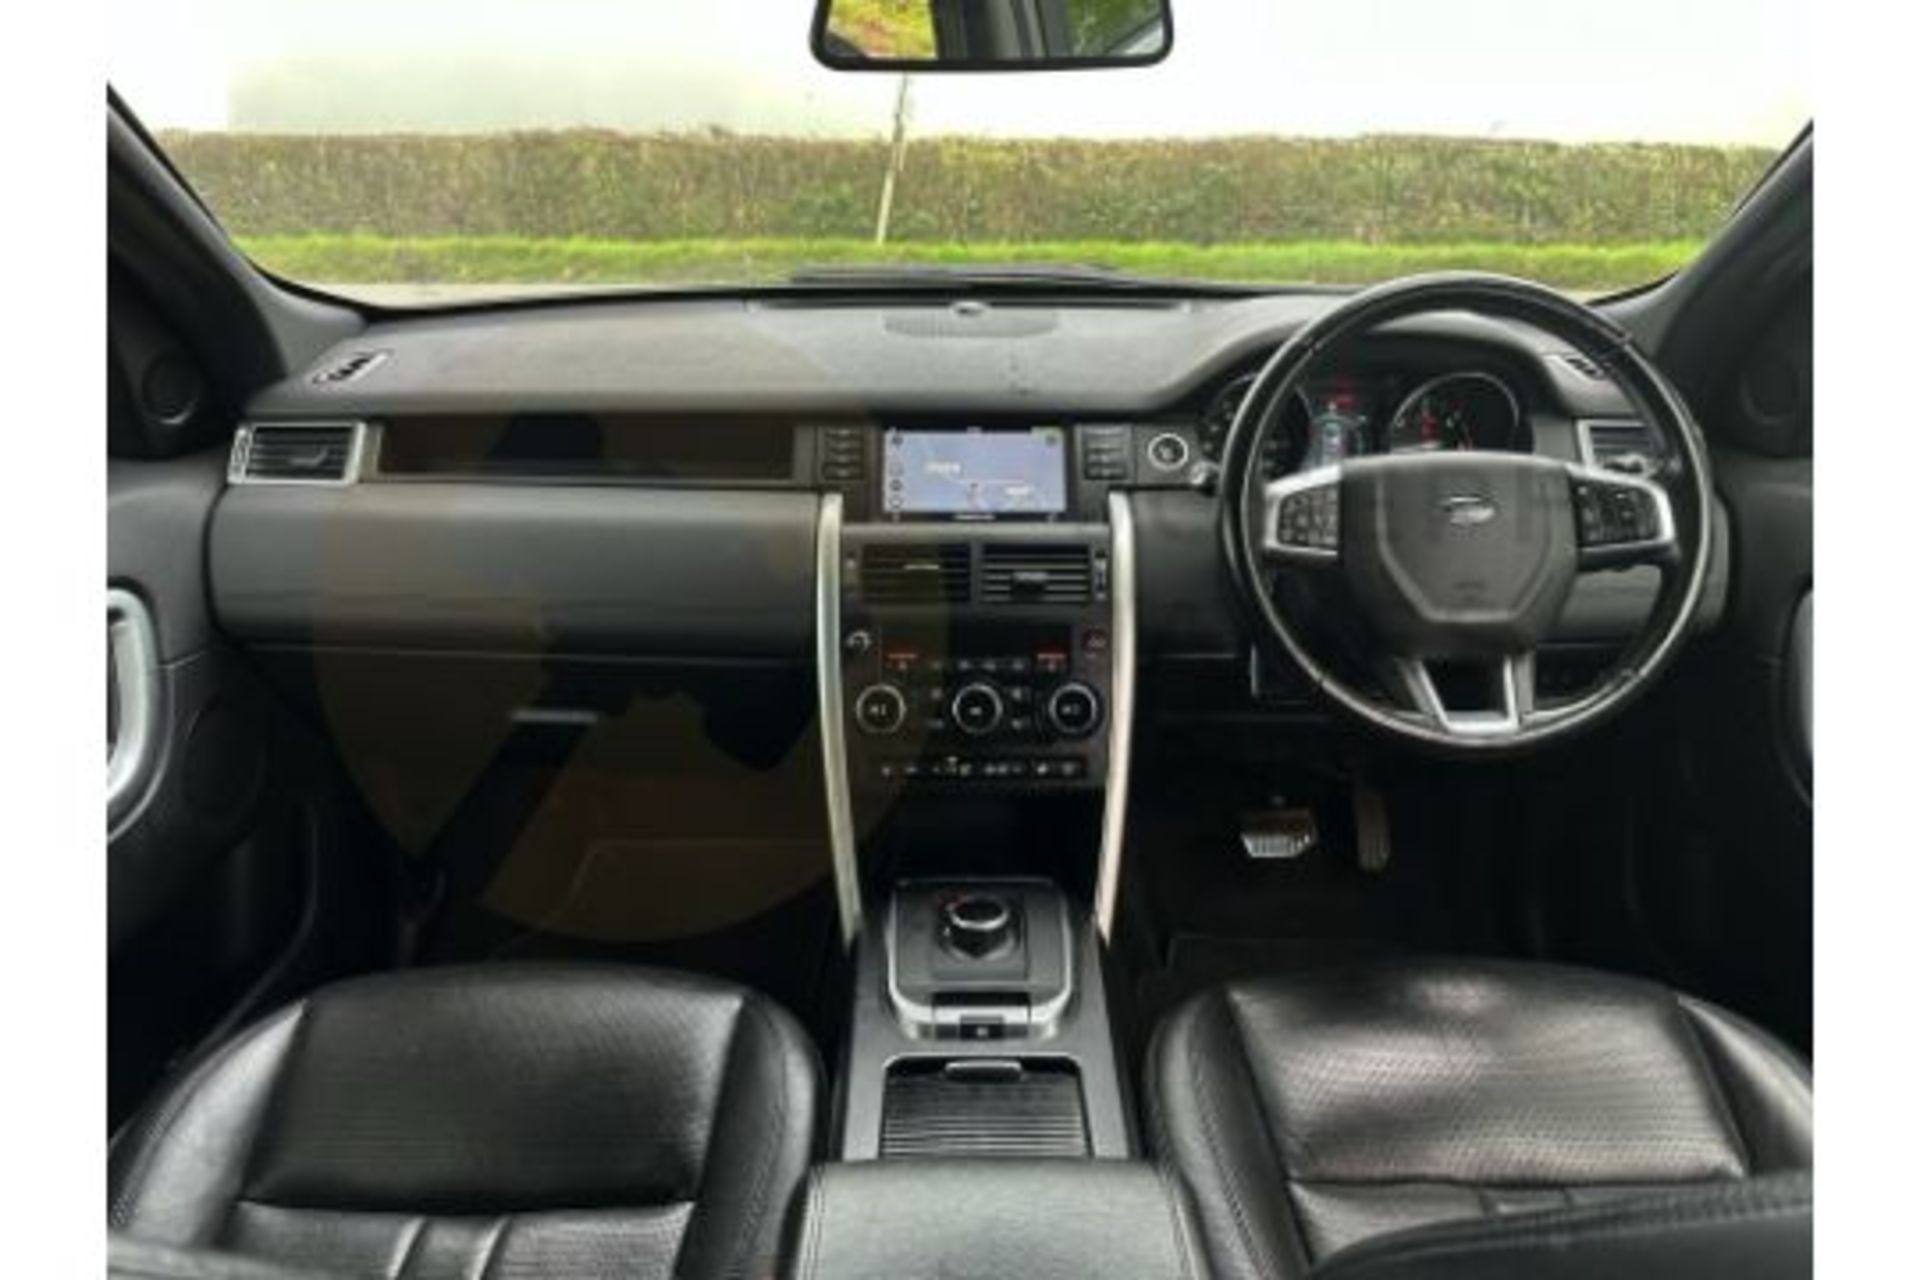 (ON SALE) LANDROVER DISCOVERY SPORT "HSE" EDITION 2.0 TD4 (180) AUTOMATIC - 68 REG - PAN ROOF - Image 30 of 51